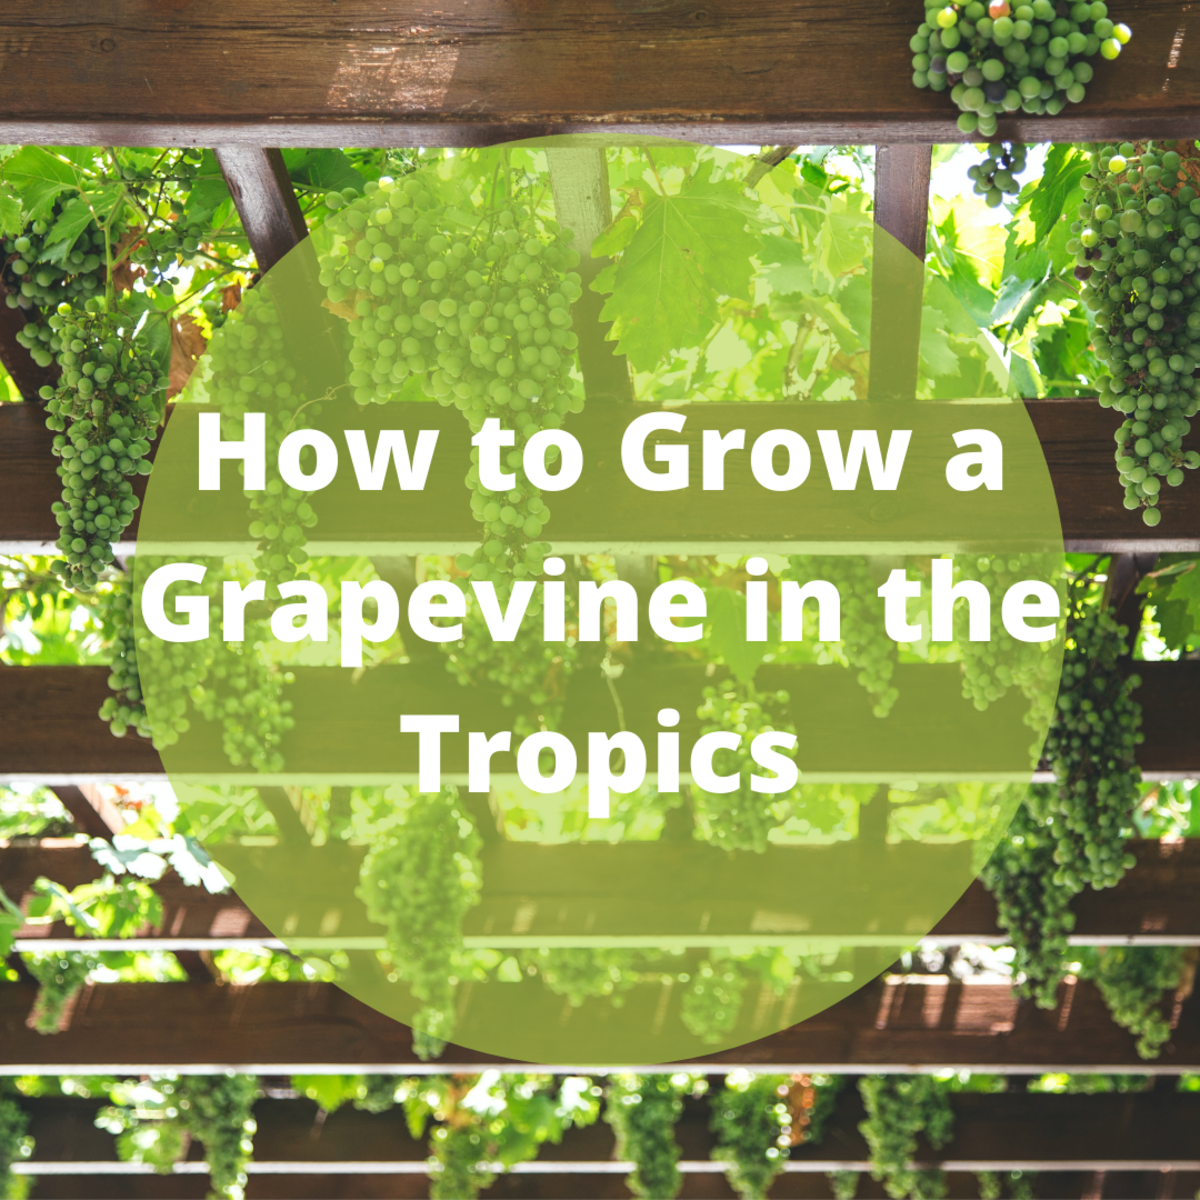 This guide will provide you with all the information you will need to start your own grape vineyard and produce healthy, delicious fruit.